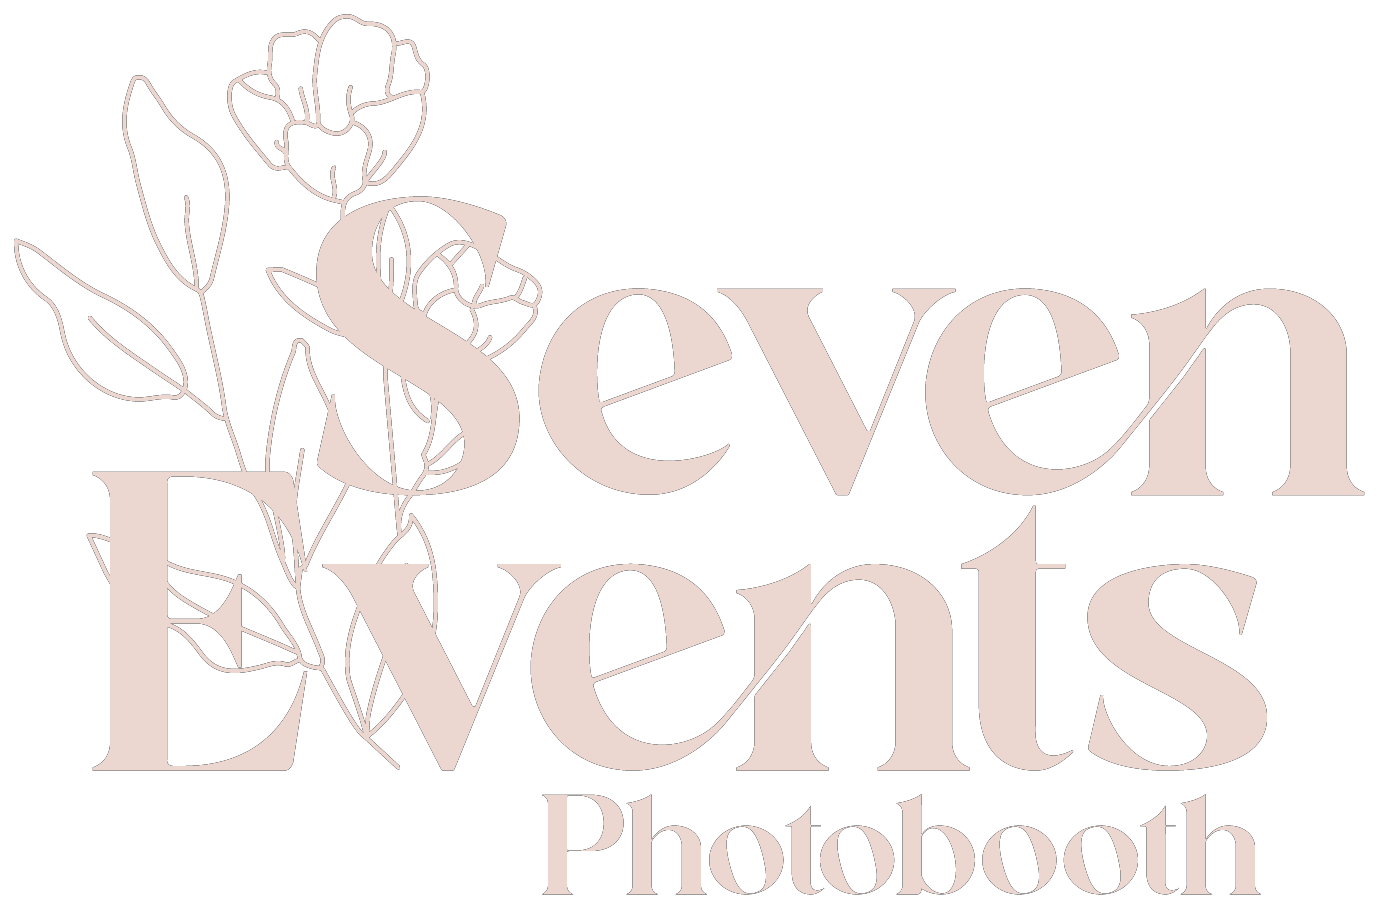 Seven Events Photobooth